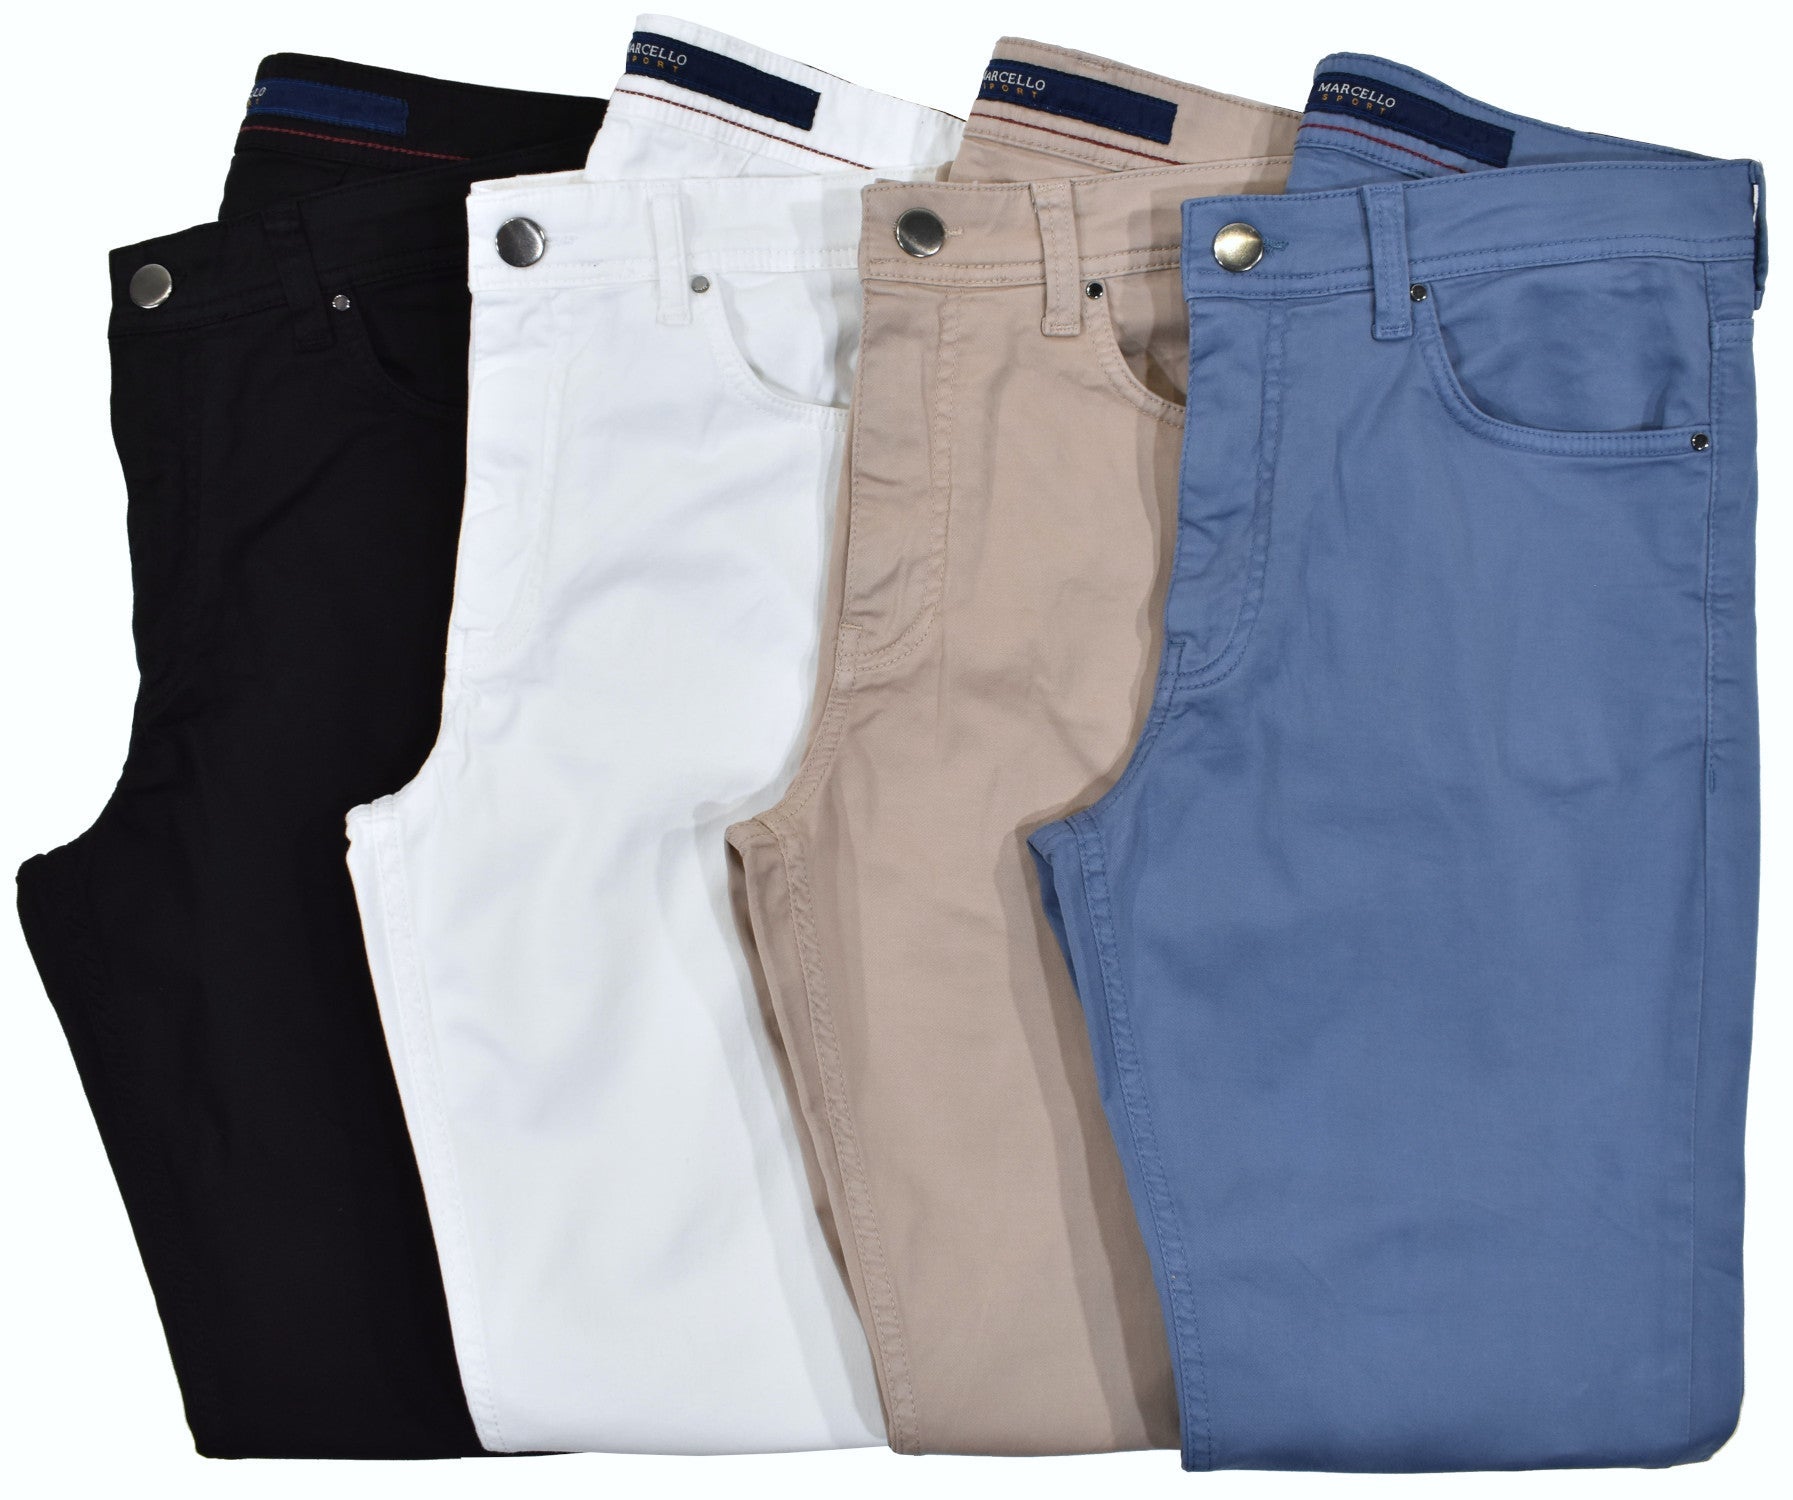 Modern Fit Jeans – Marcello Sport